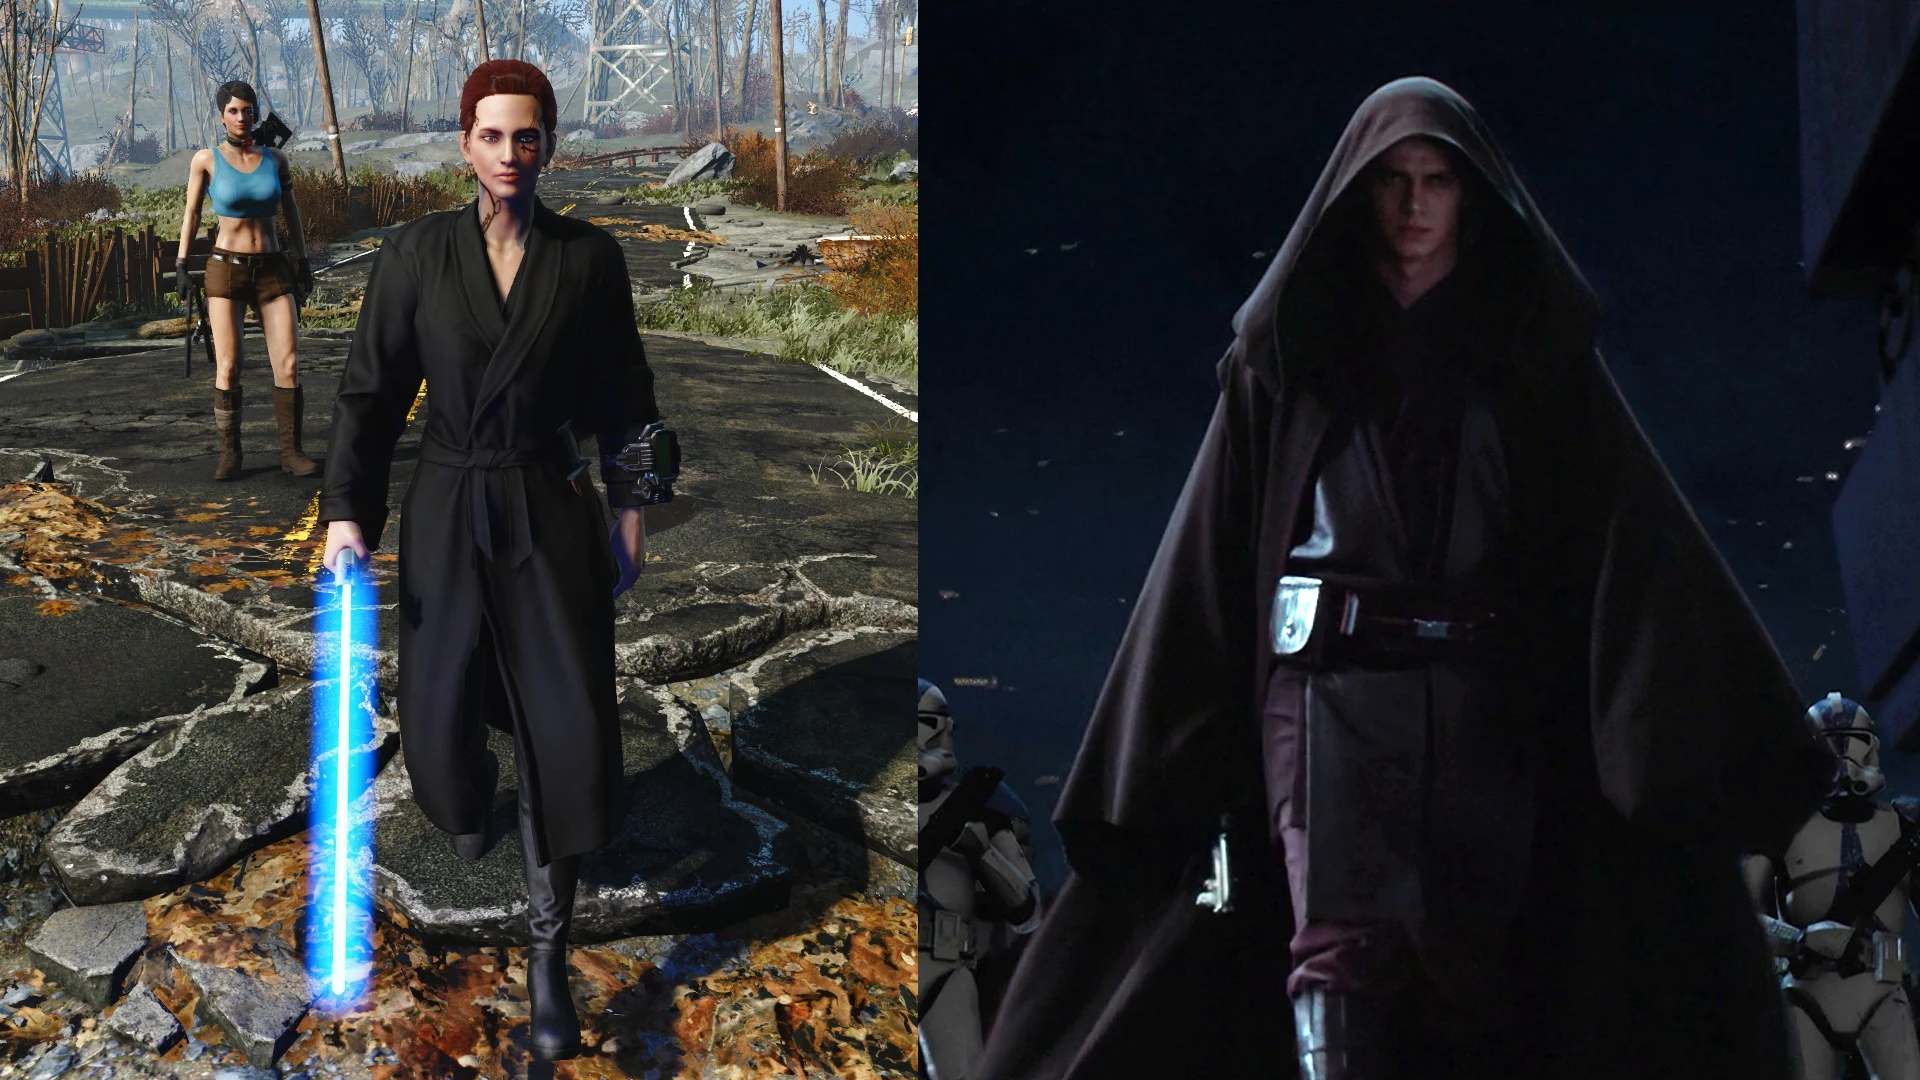 Jedi Robes Bathrobe Replacer At Fallout 4 Nexus Mods And Community.